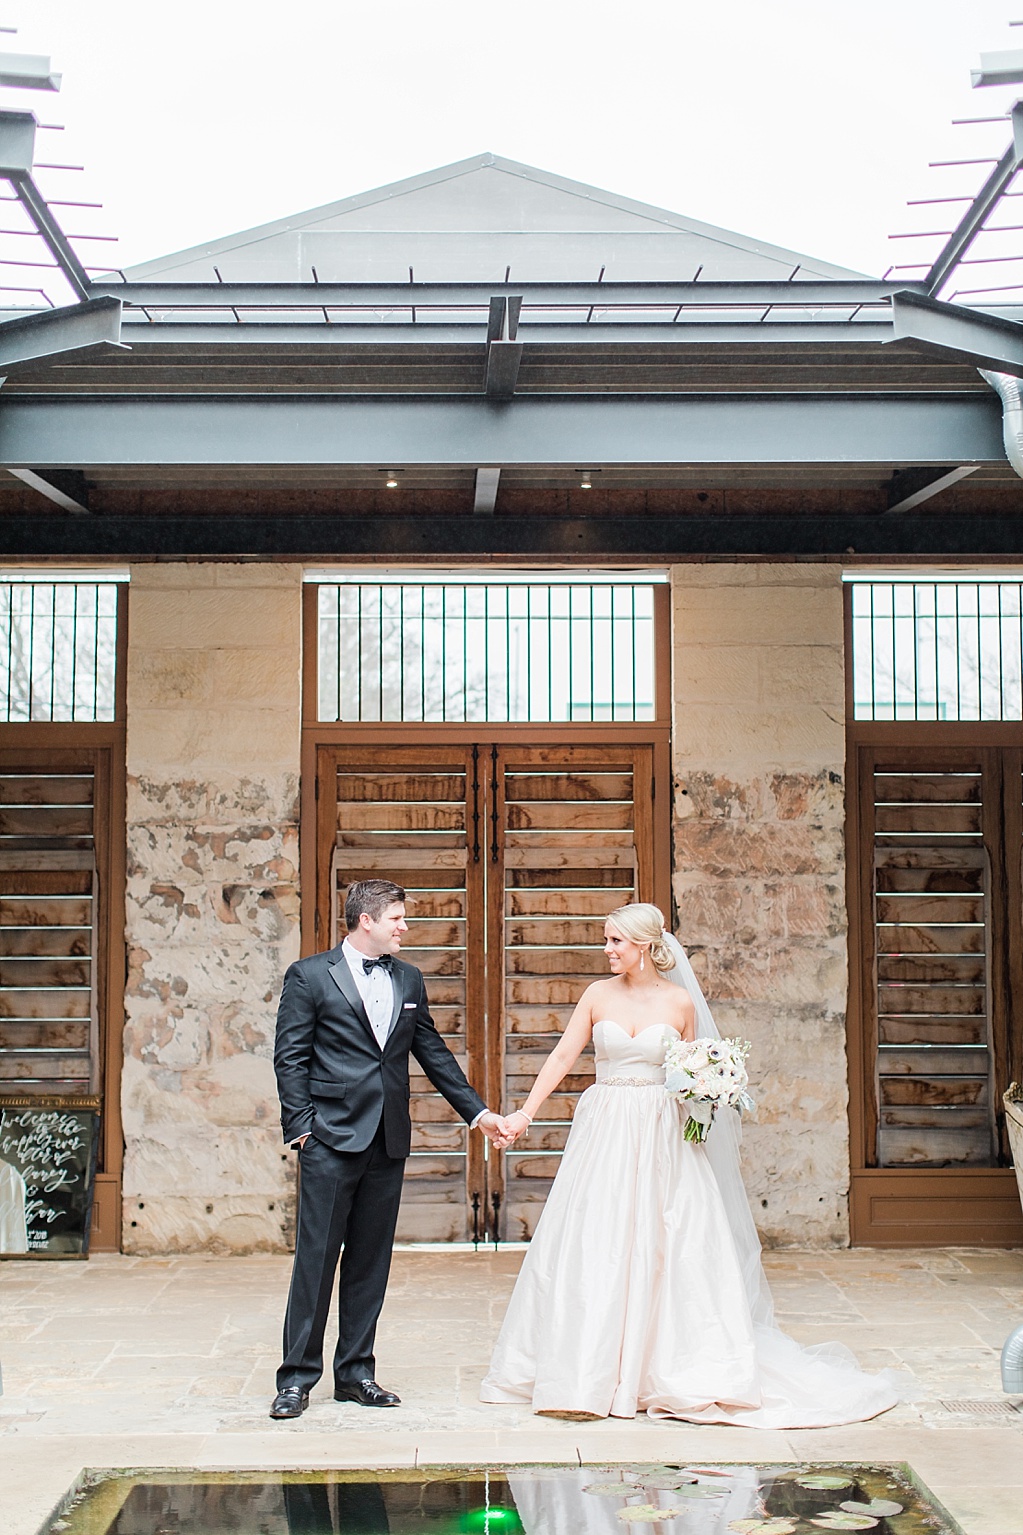 An Art Deco Black Tie Wedding at The Ingenhuett On High in Comfort Texas Featuring a Bentley Vintage Car and Blush Wedding Dress 0054